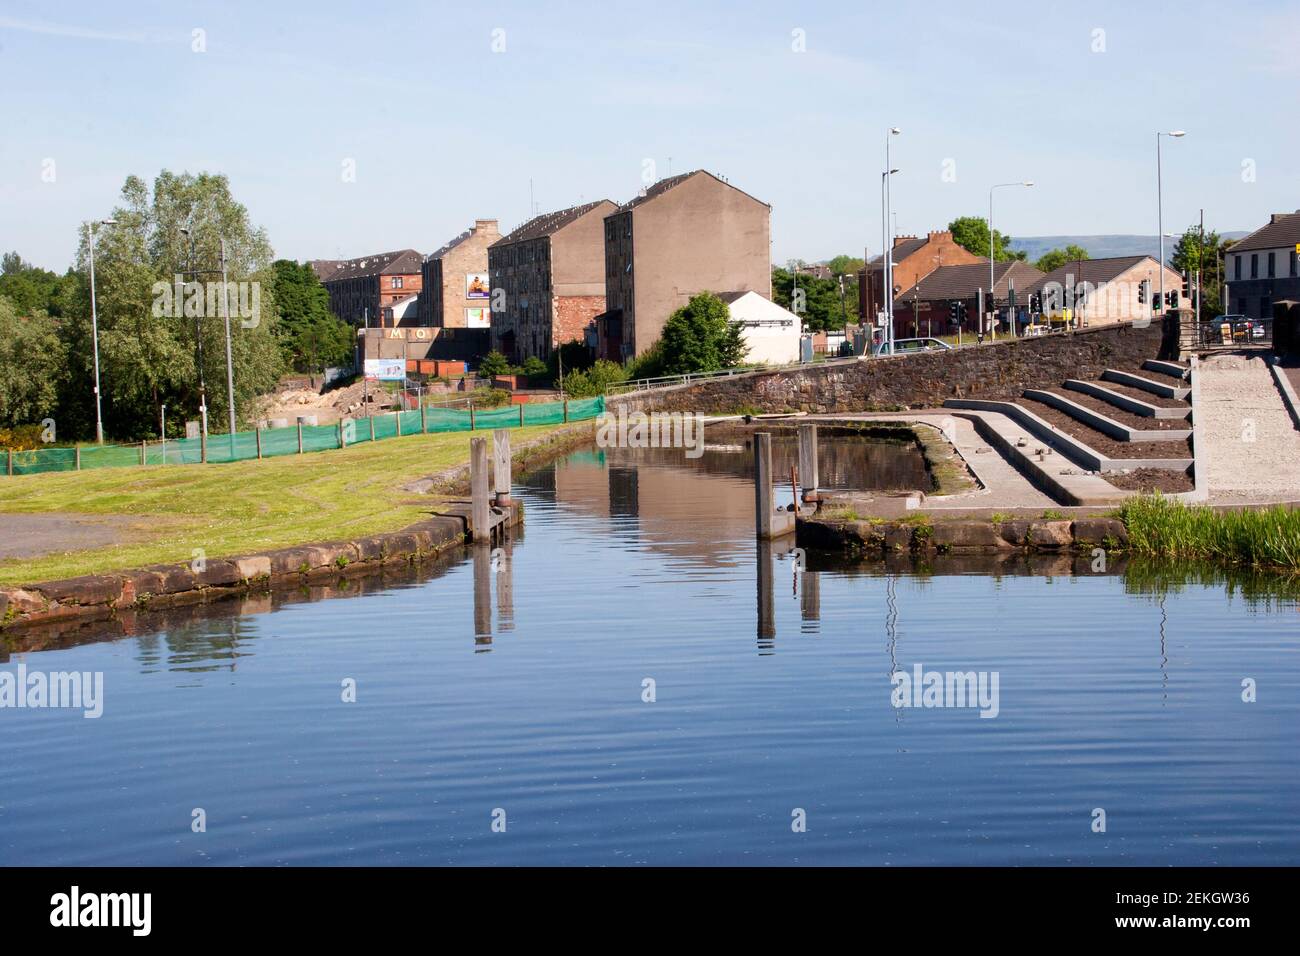 Forth and Clyde Canal at Maryhill, Glasgow showing the boat dock. Stock Photo